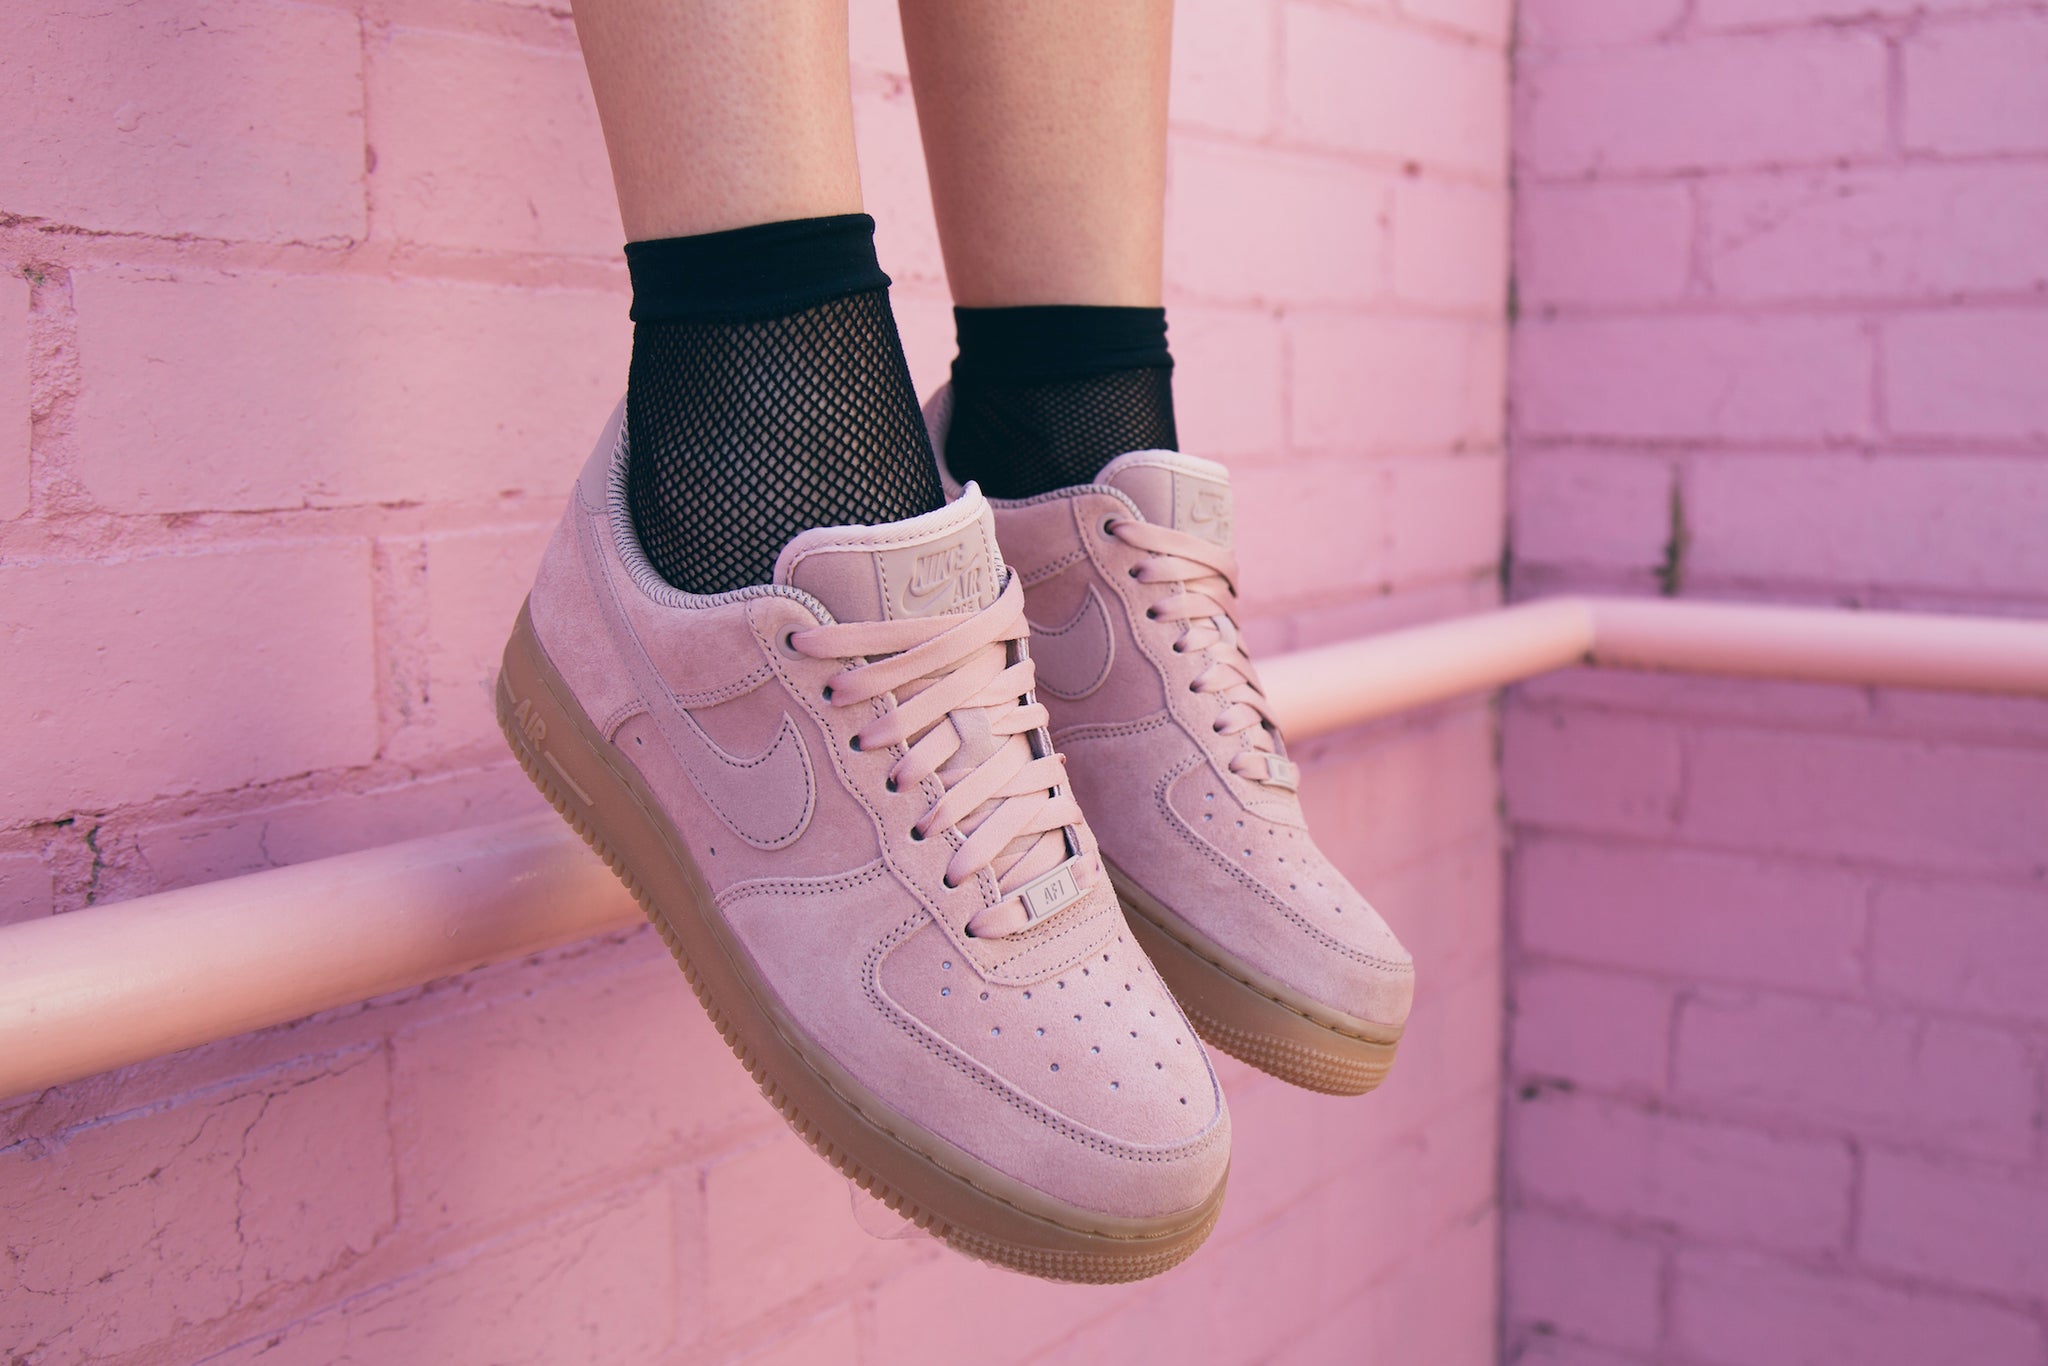 SNEAKER RELEASES | Nike Air Force 1 '07 SE Particle Pink | October 13